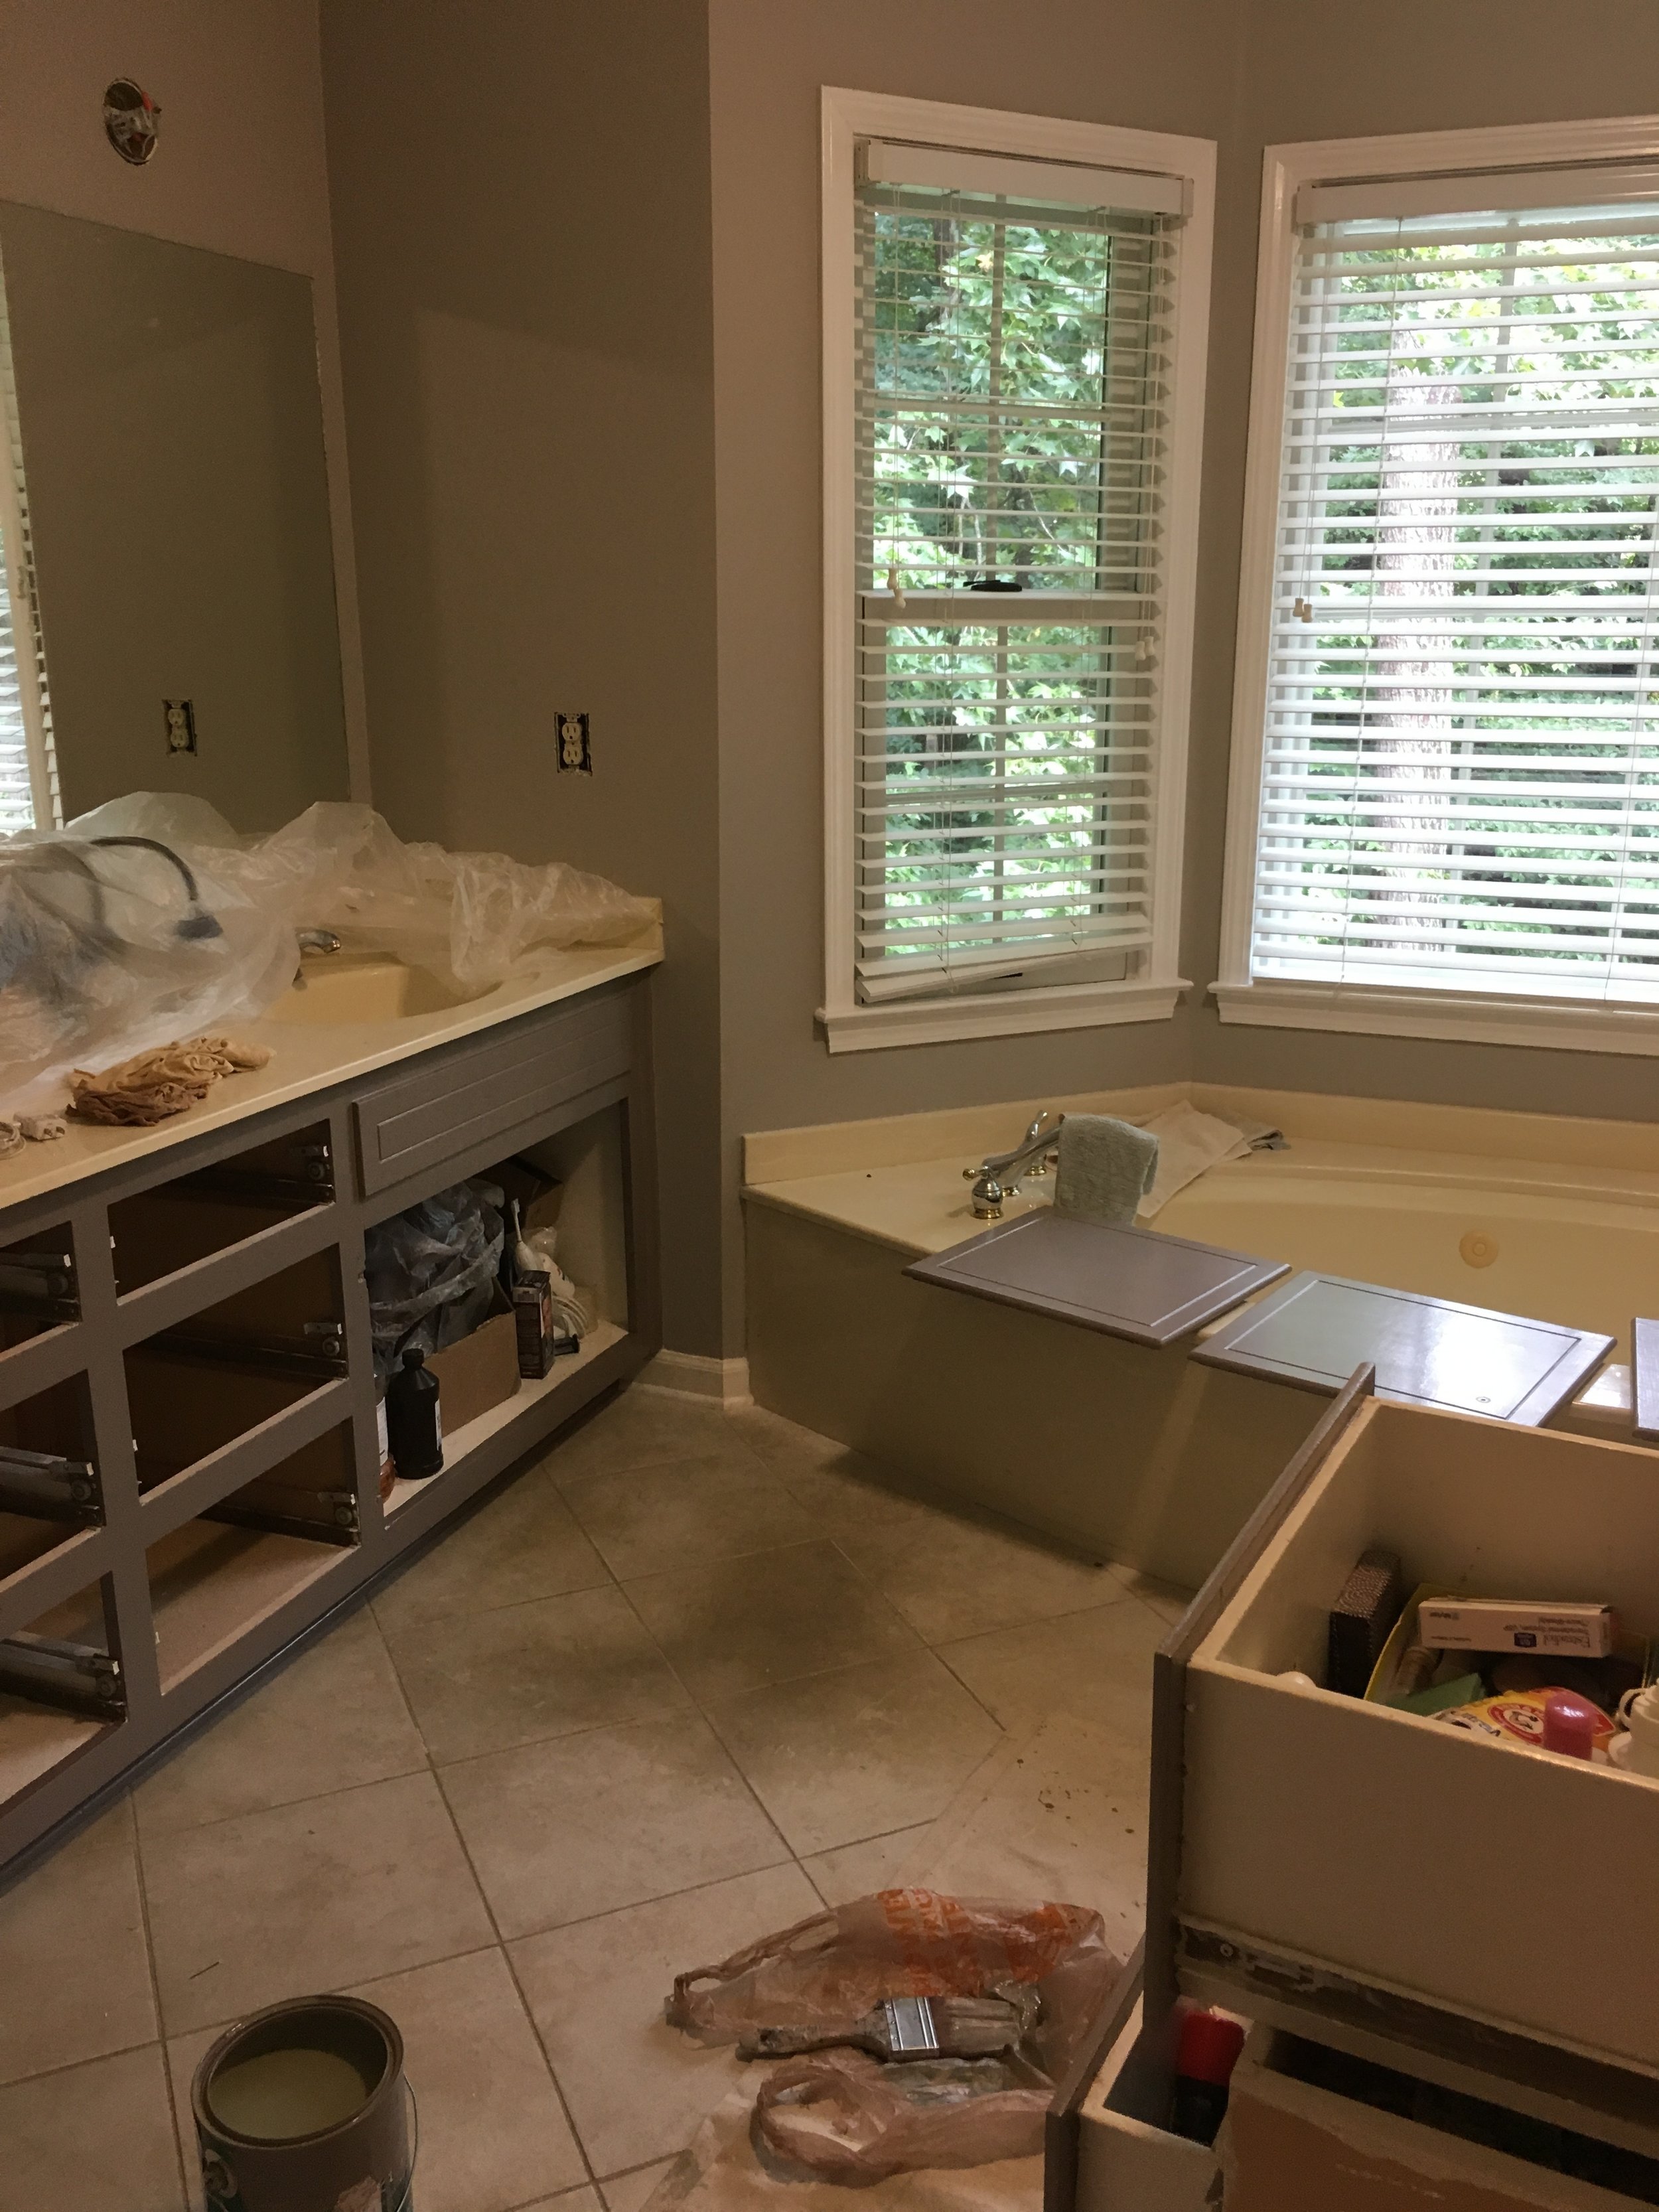 Next we renovated the bathrooms! - Misty Grey makes it extra soothing!